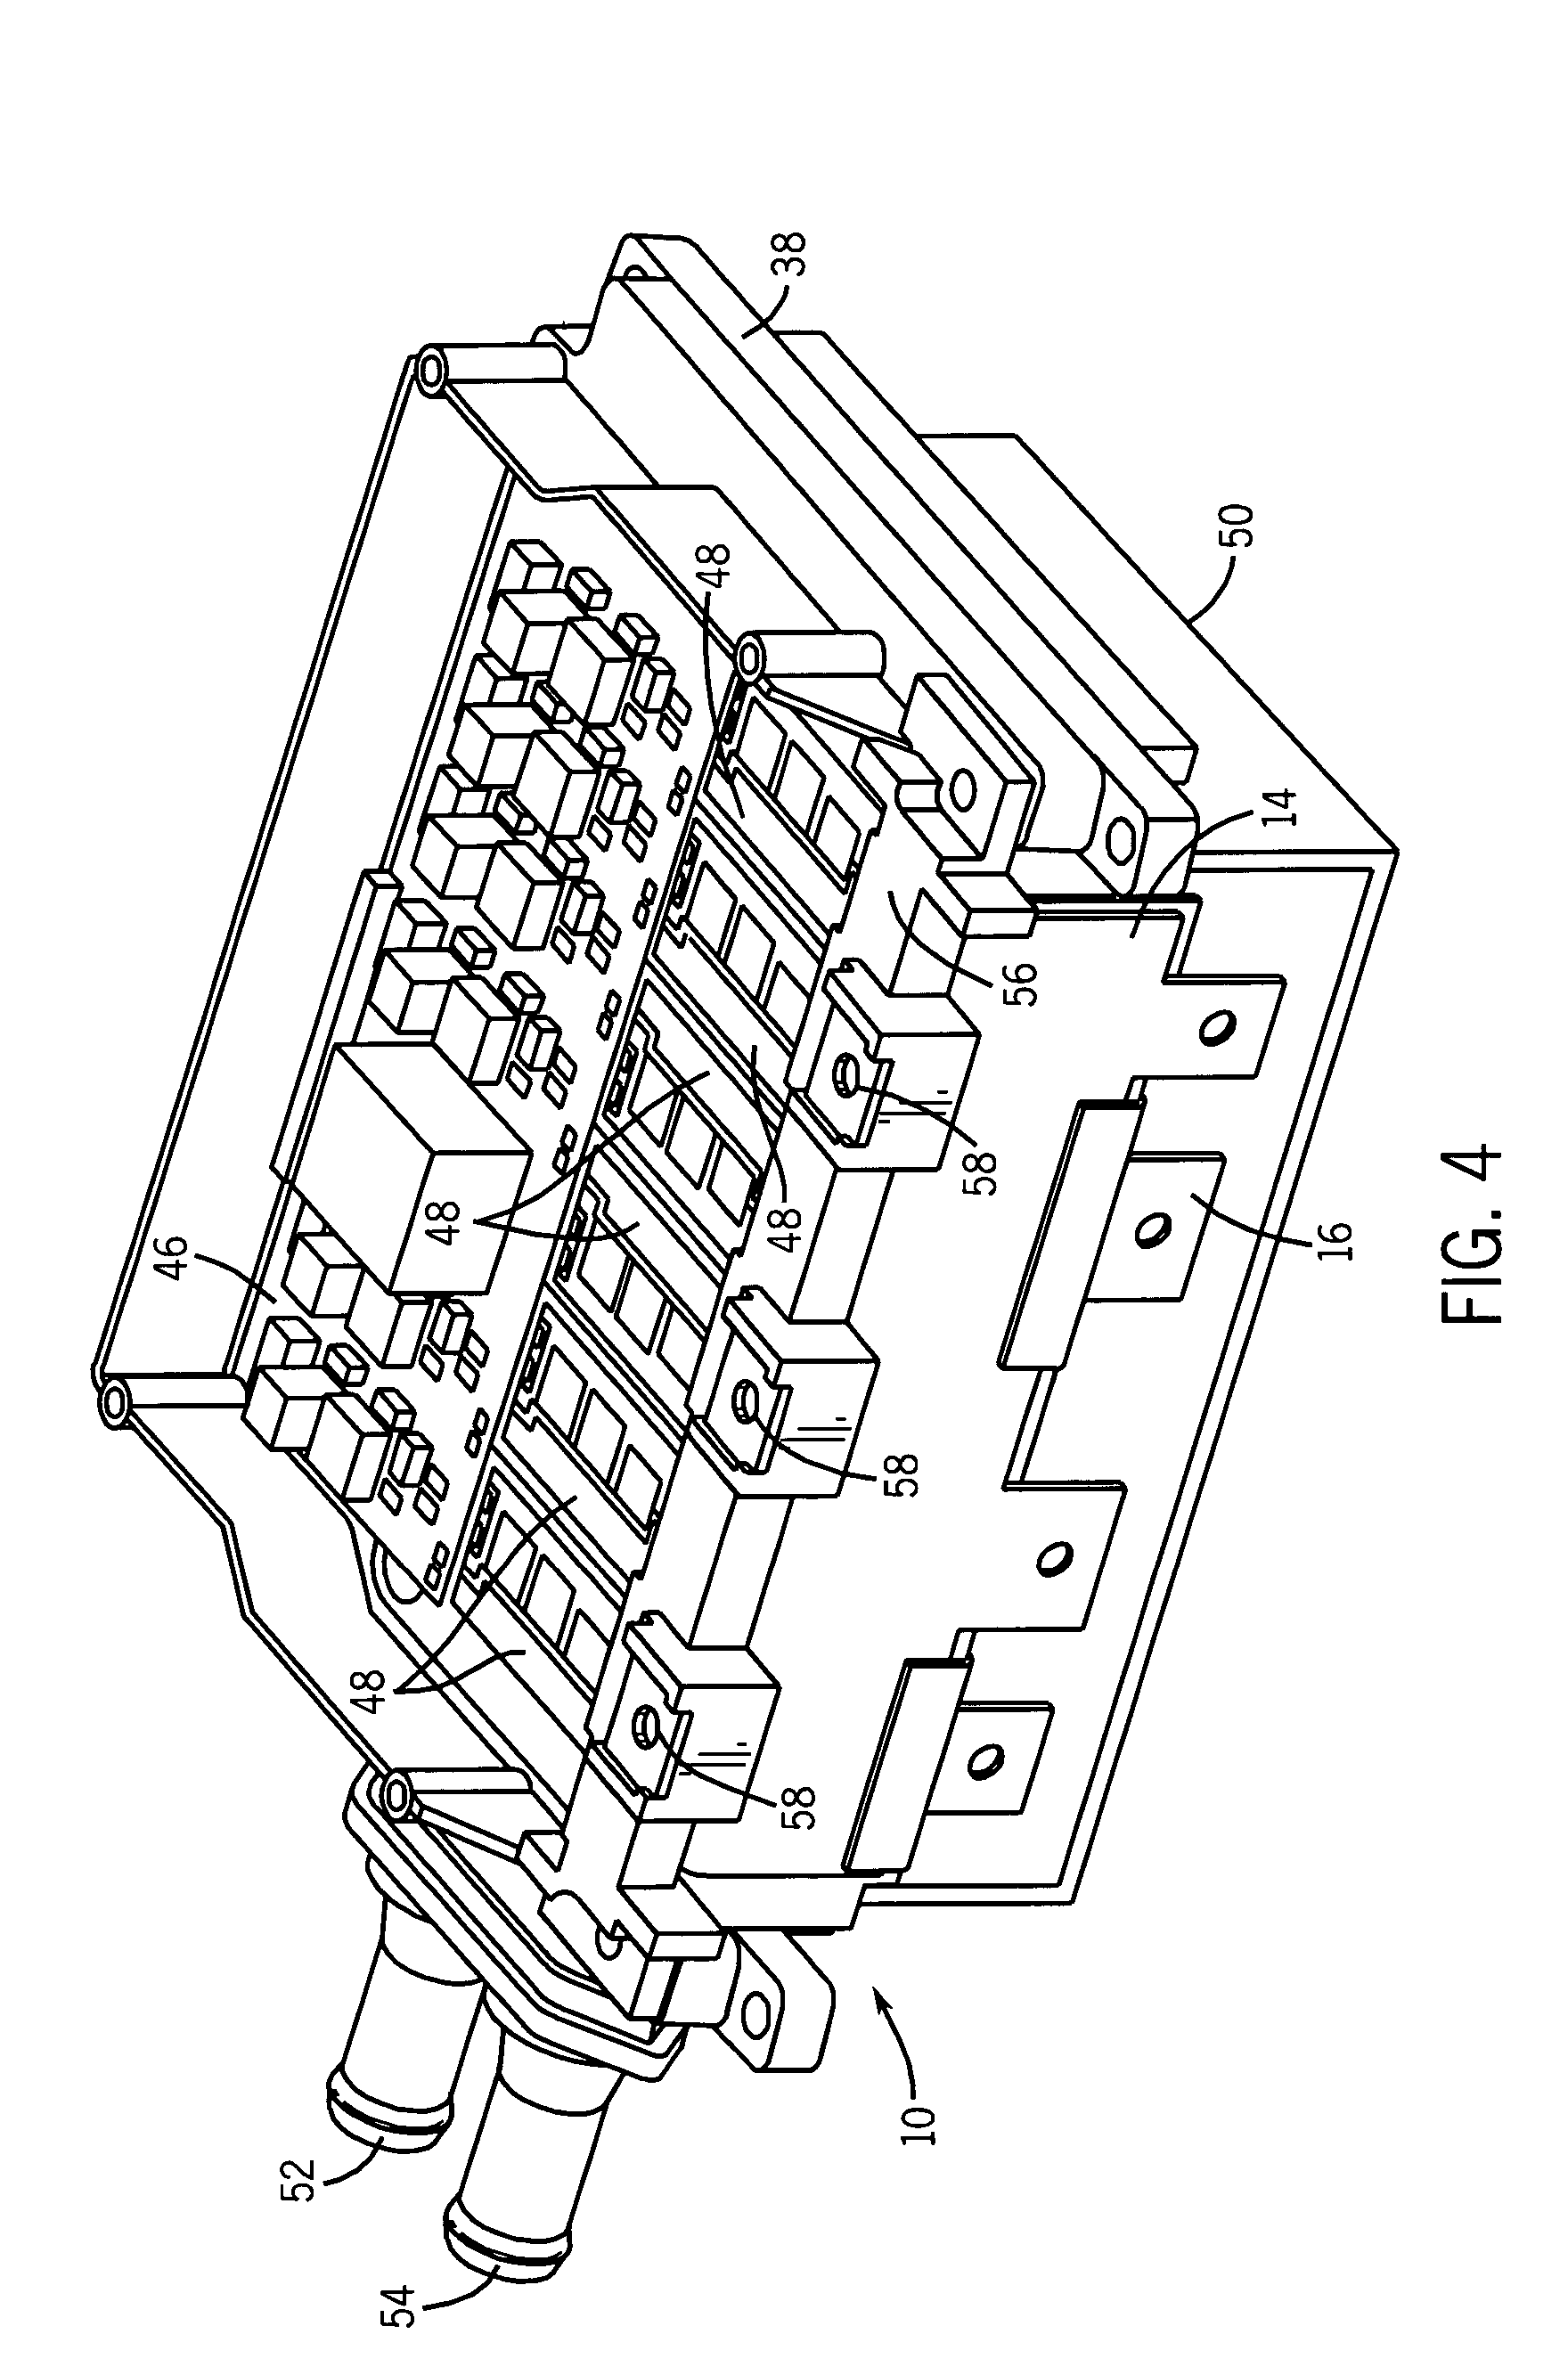 Bus structure for power switching circuits